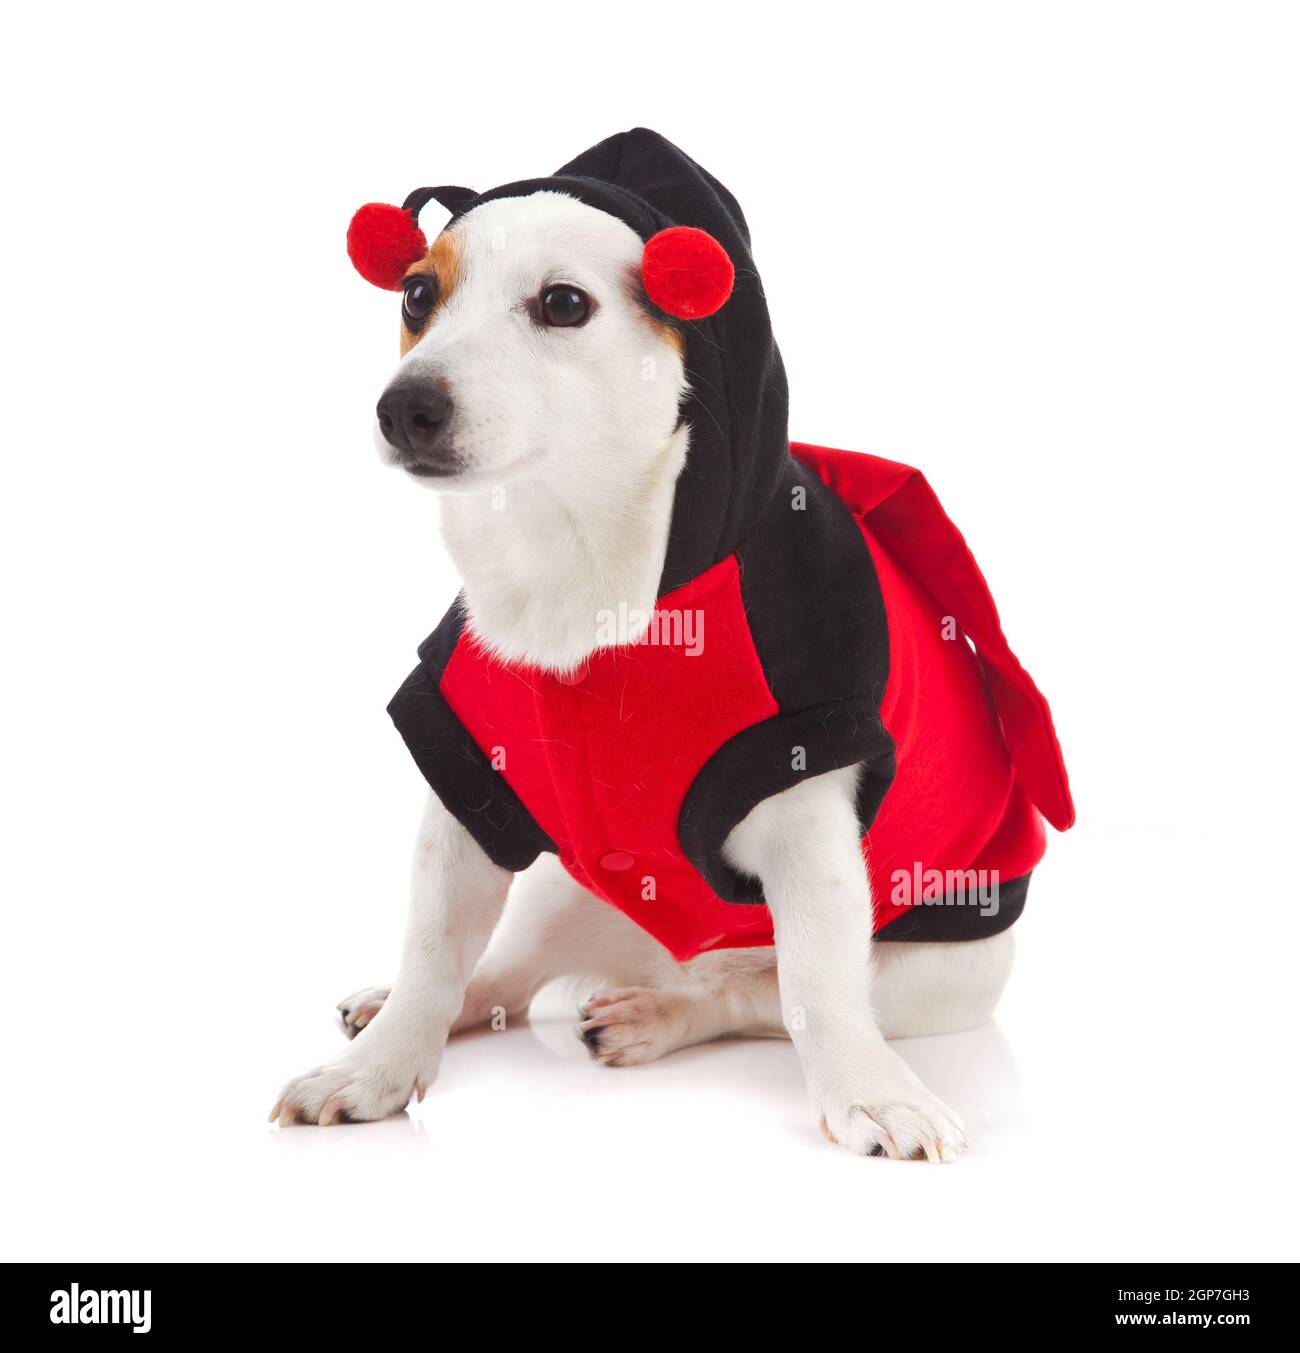 Jack Russell dressed up as a ladybug on white background Stock Photo